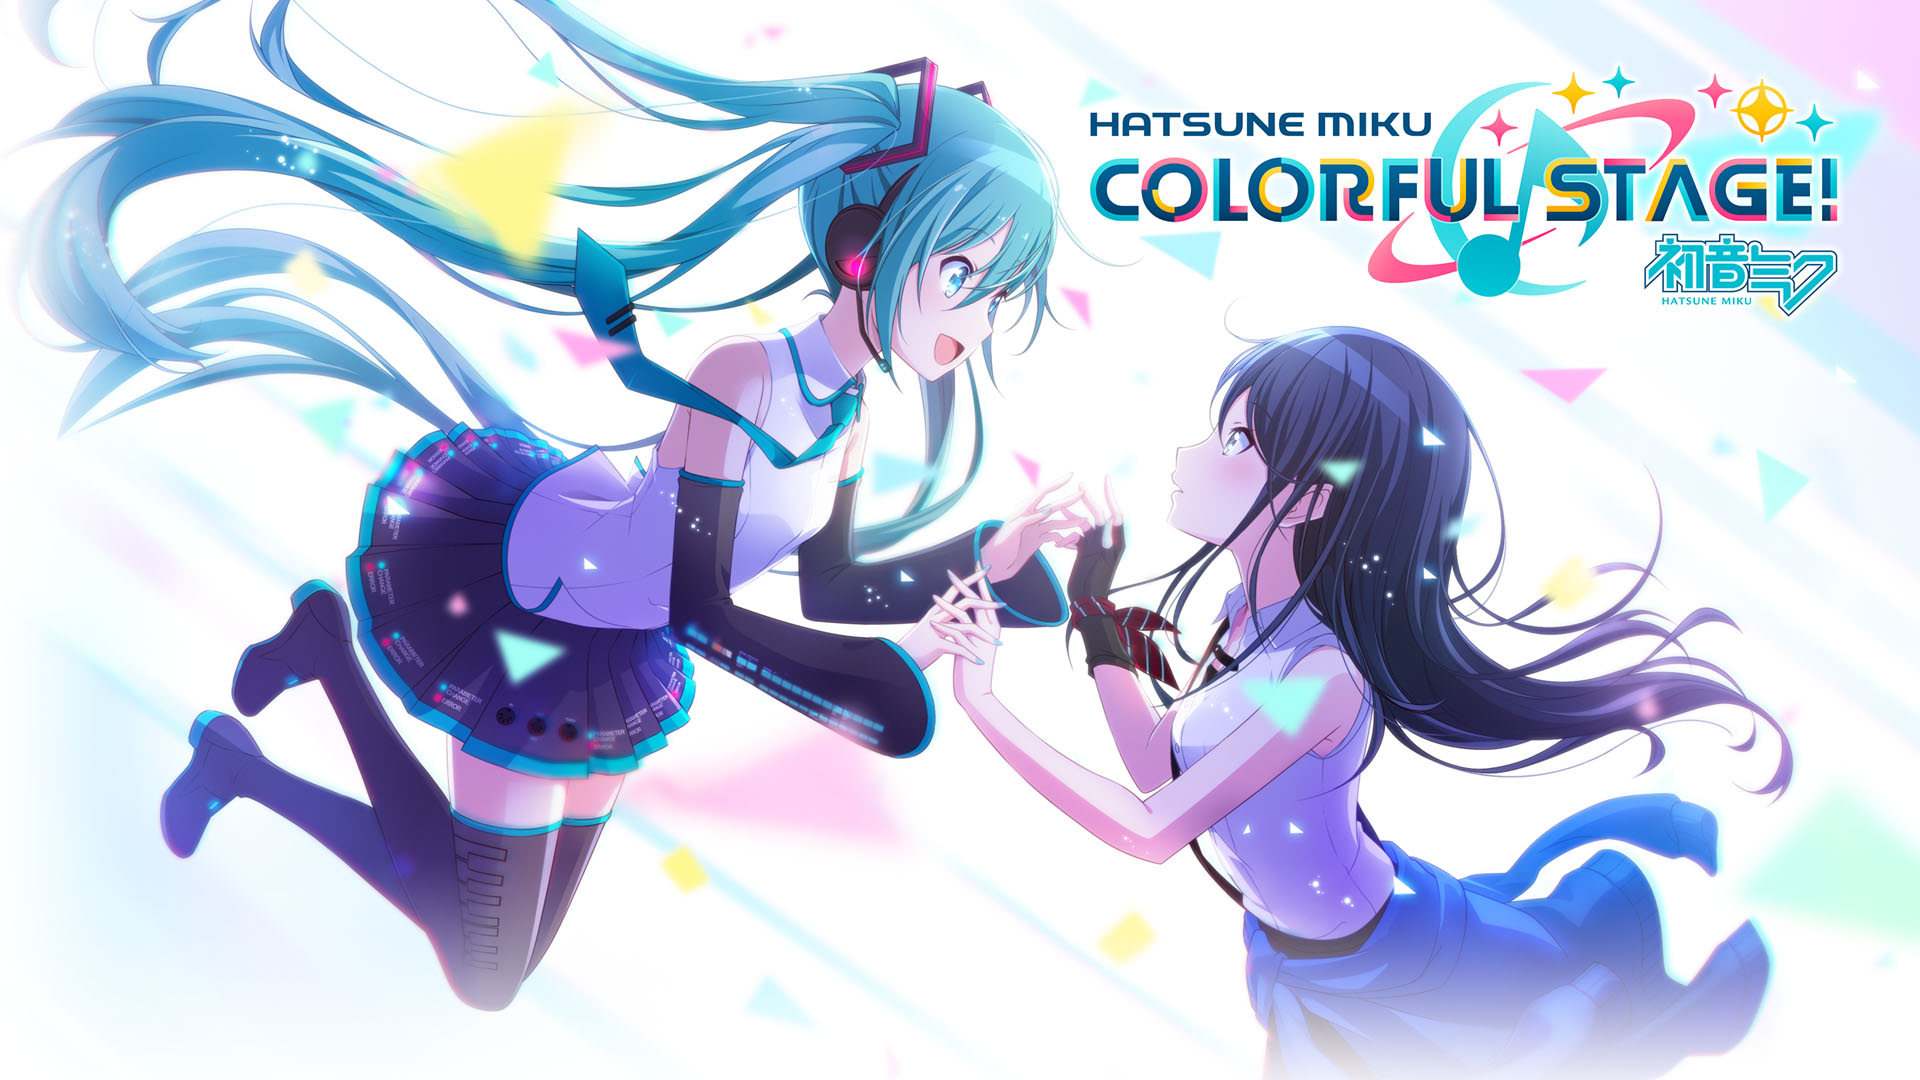 Hatsune Miku: COLORFUL STAGE! is coming west